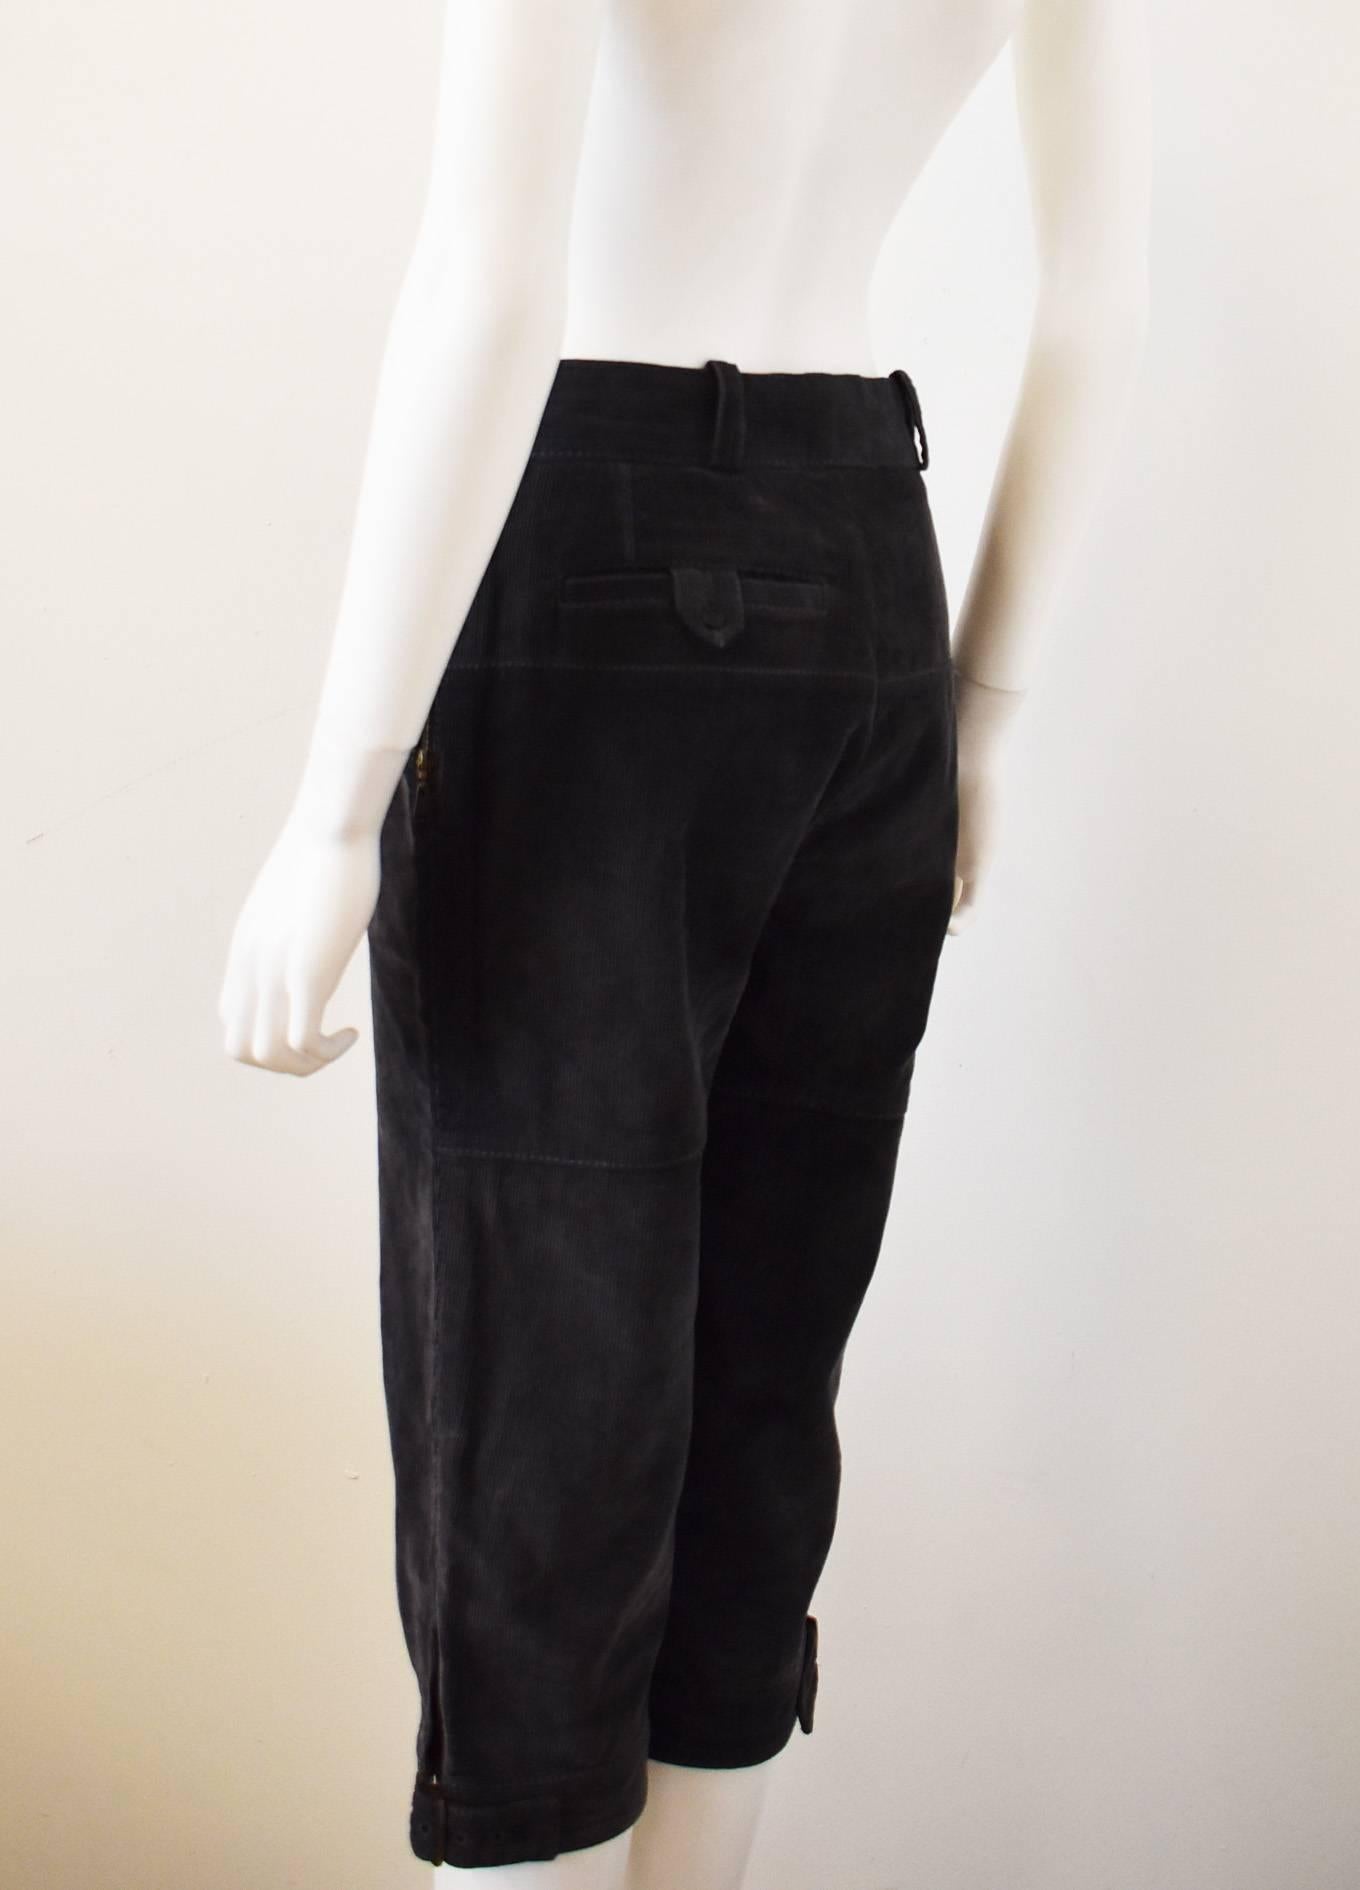 A pair of charcoal grey corduroy plus fours by Louis Vuitton. The cropped trousers have a simple straight shape with hook fastening at the waist and buckles at the cuffs to tighten or loosen the leg holes. The trousers have contrast white stitching